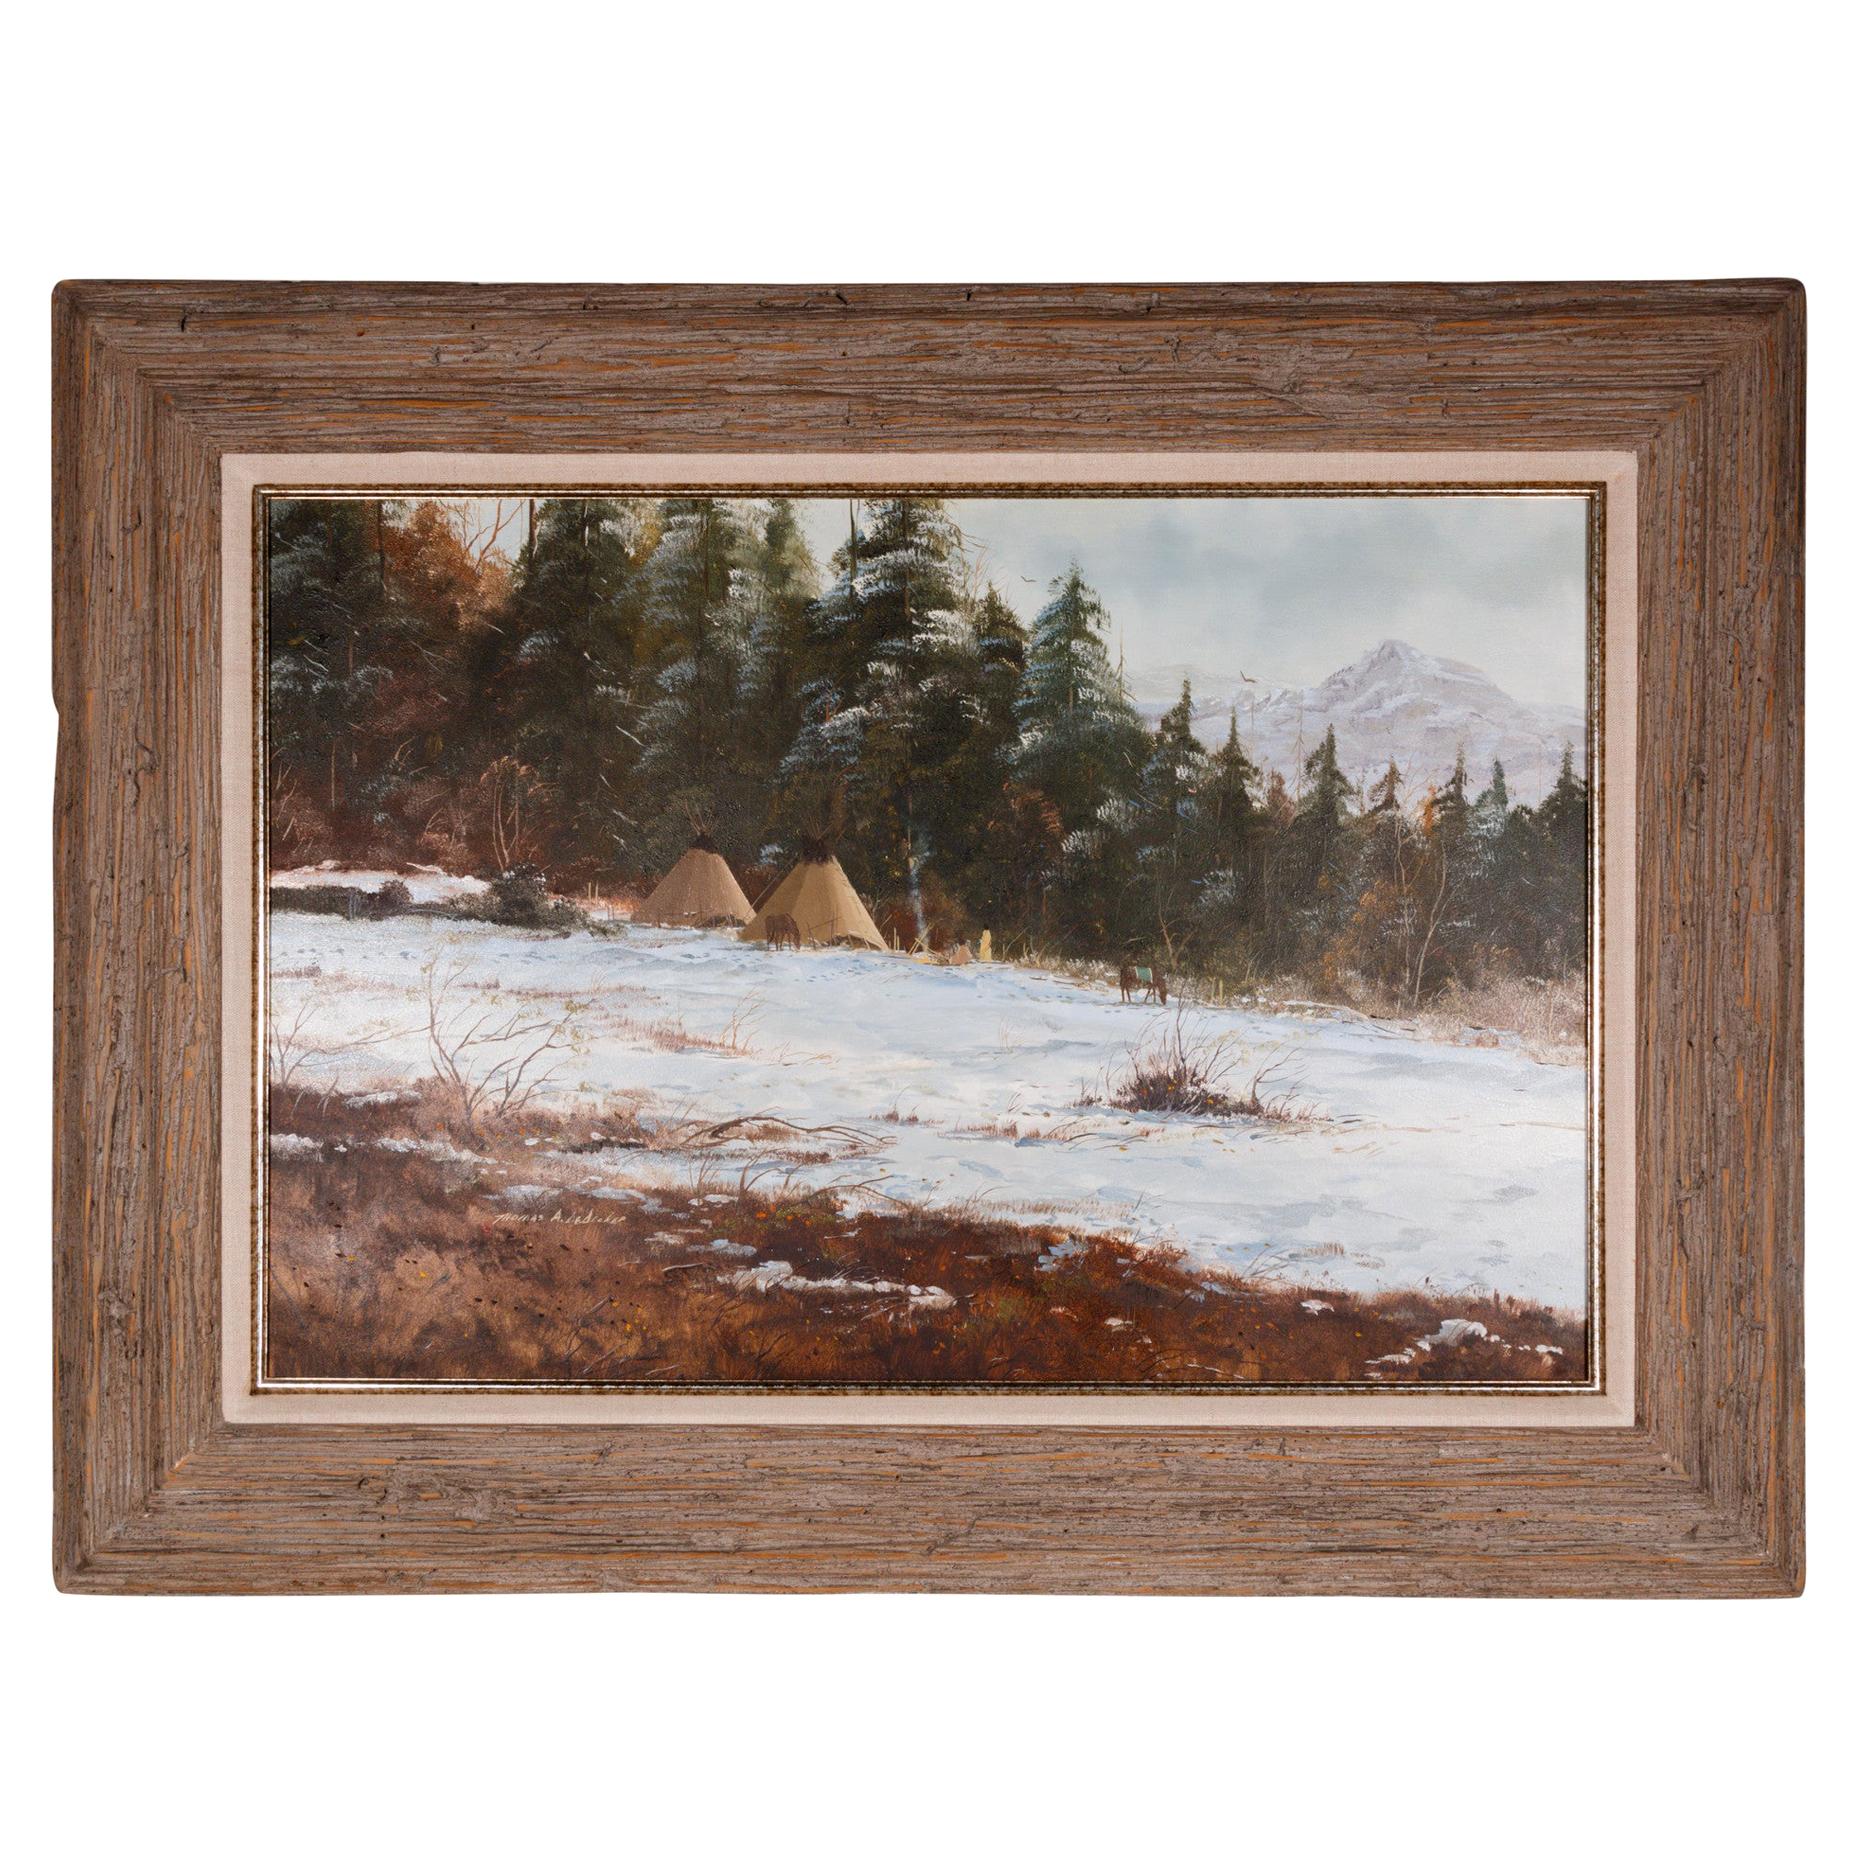 Original Painting "A Closing of Winter" by Thomas DeDecker For Sale